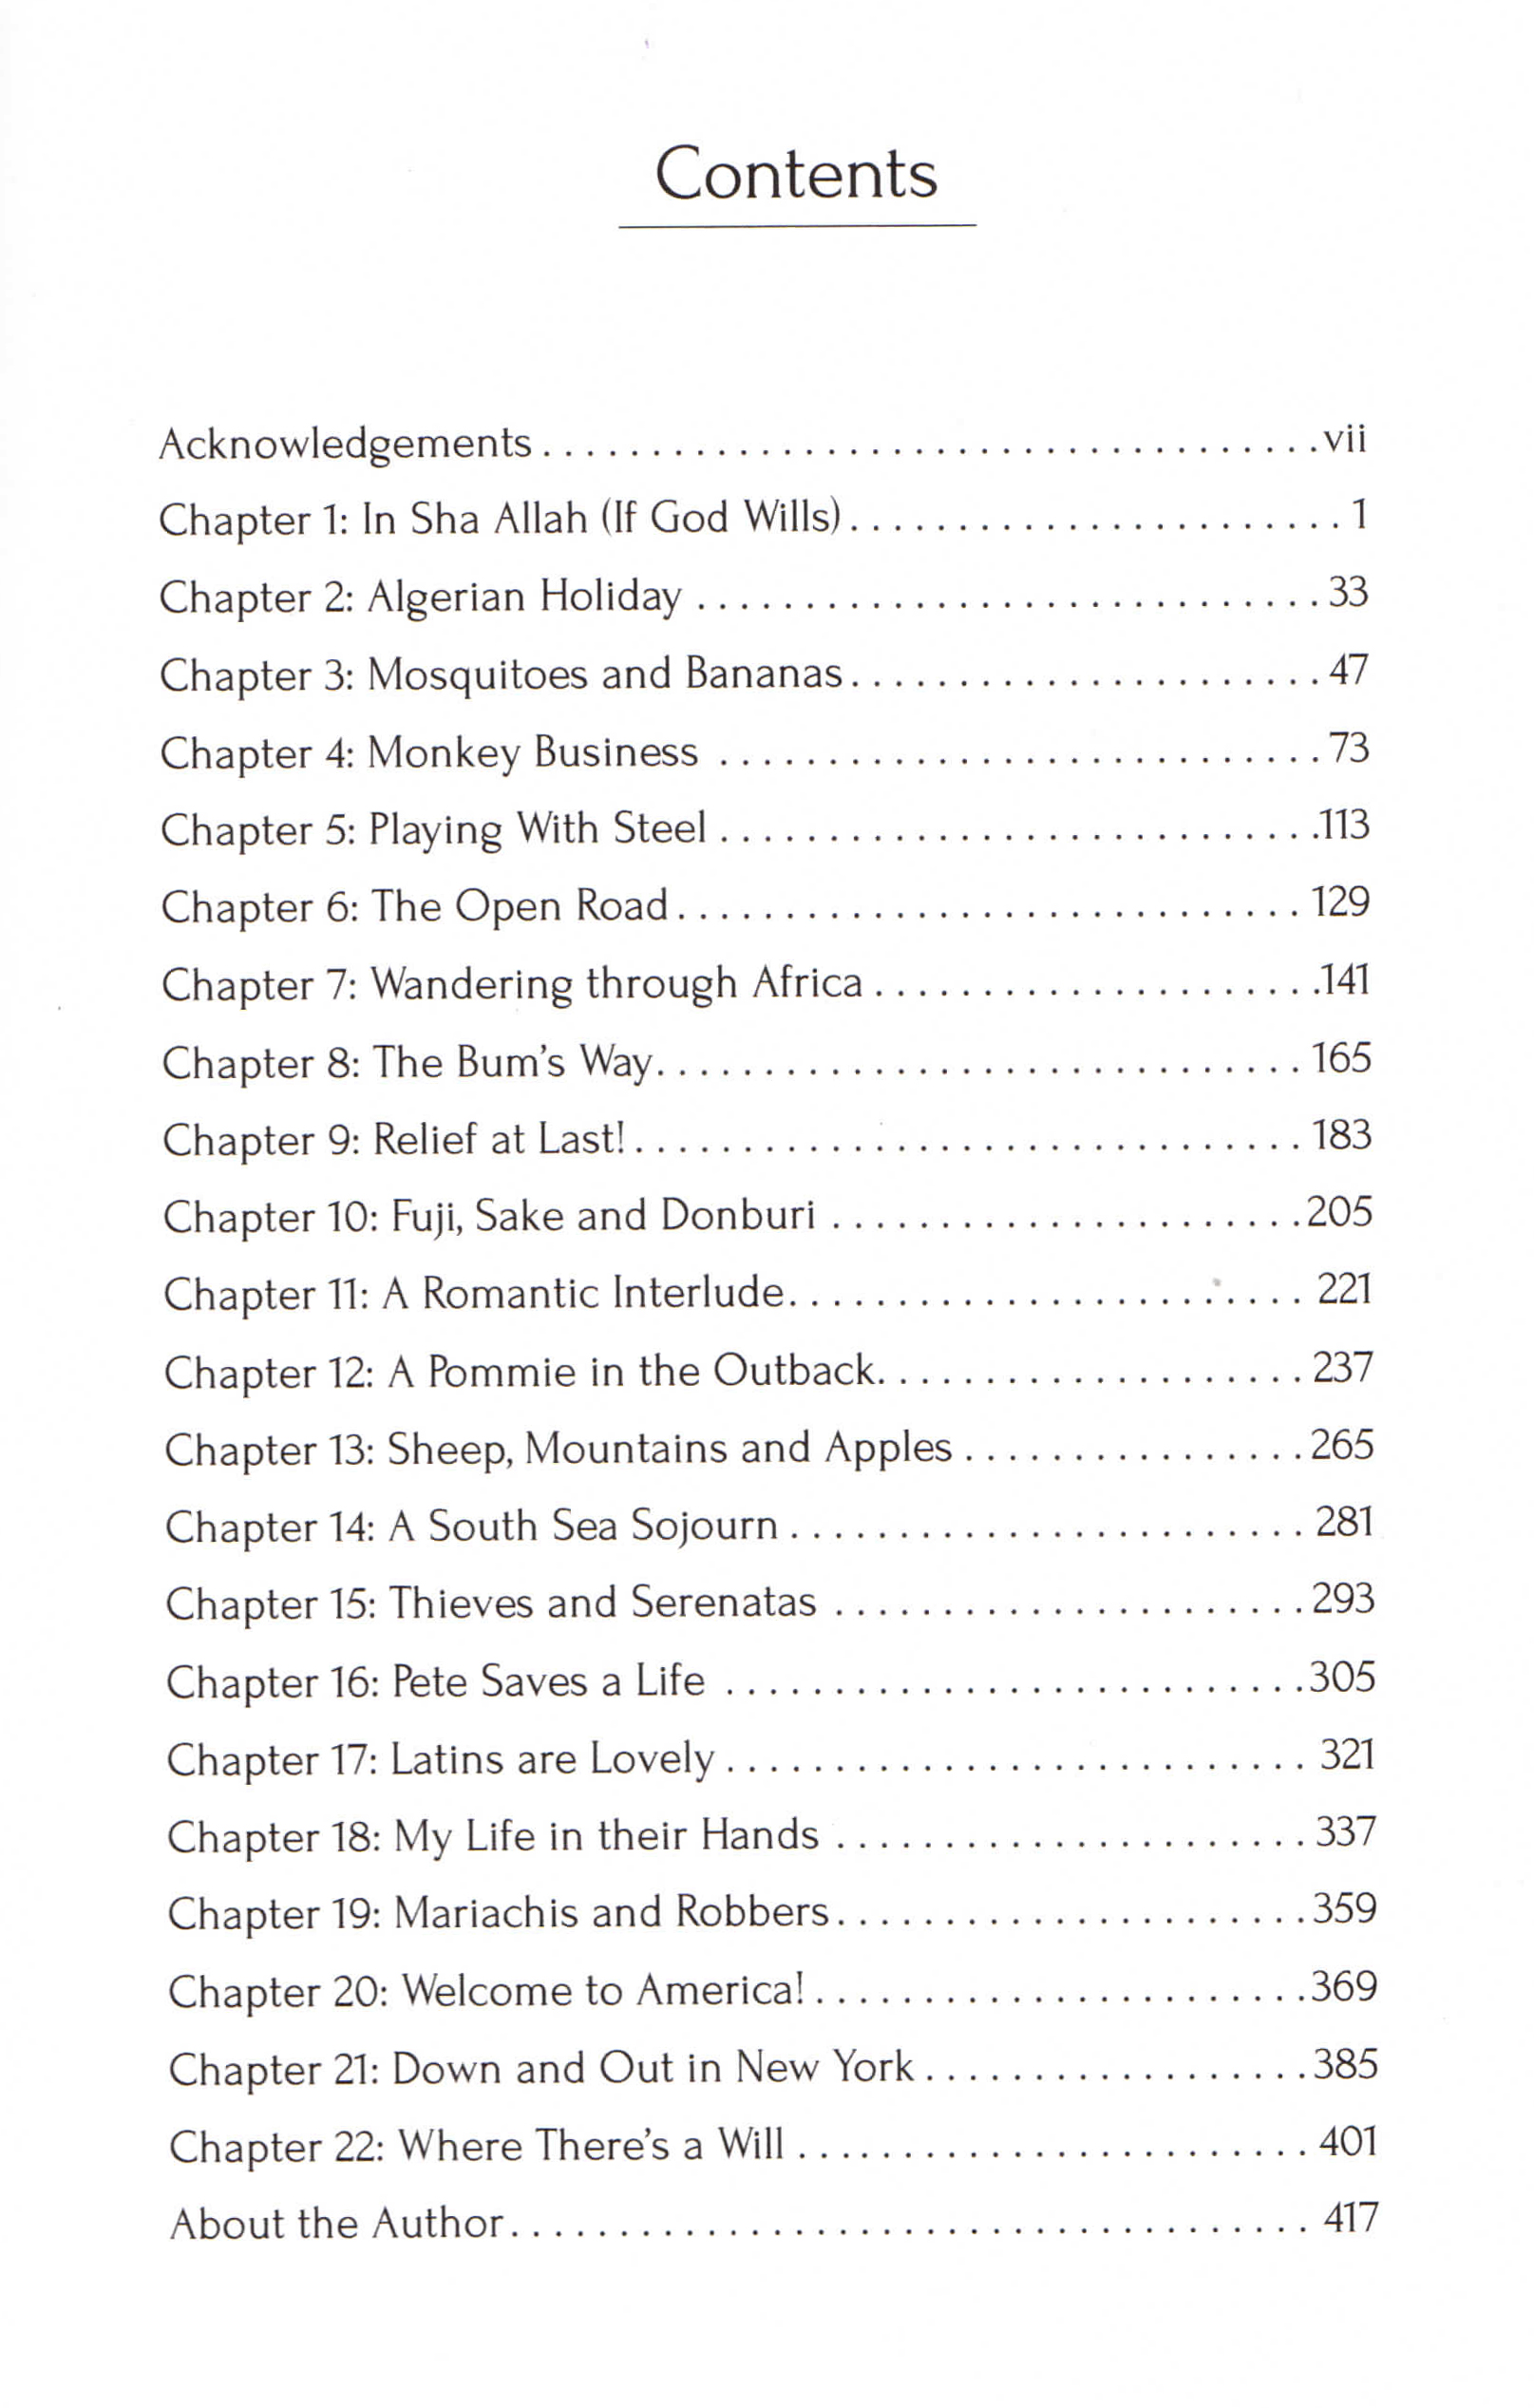 Table of contents of David's book.